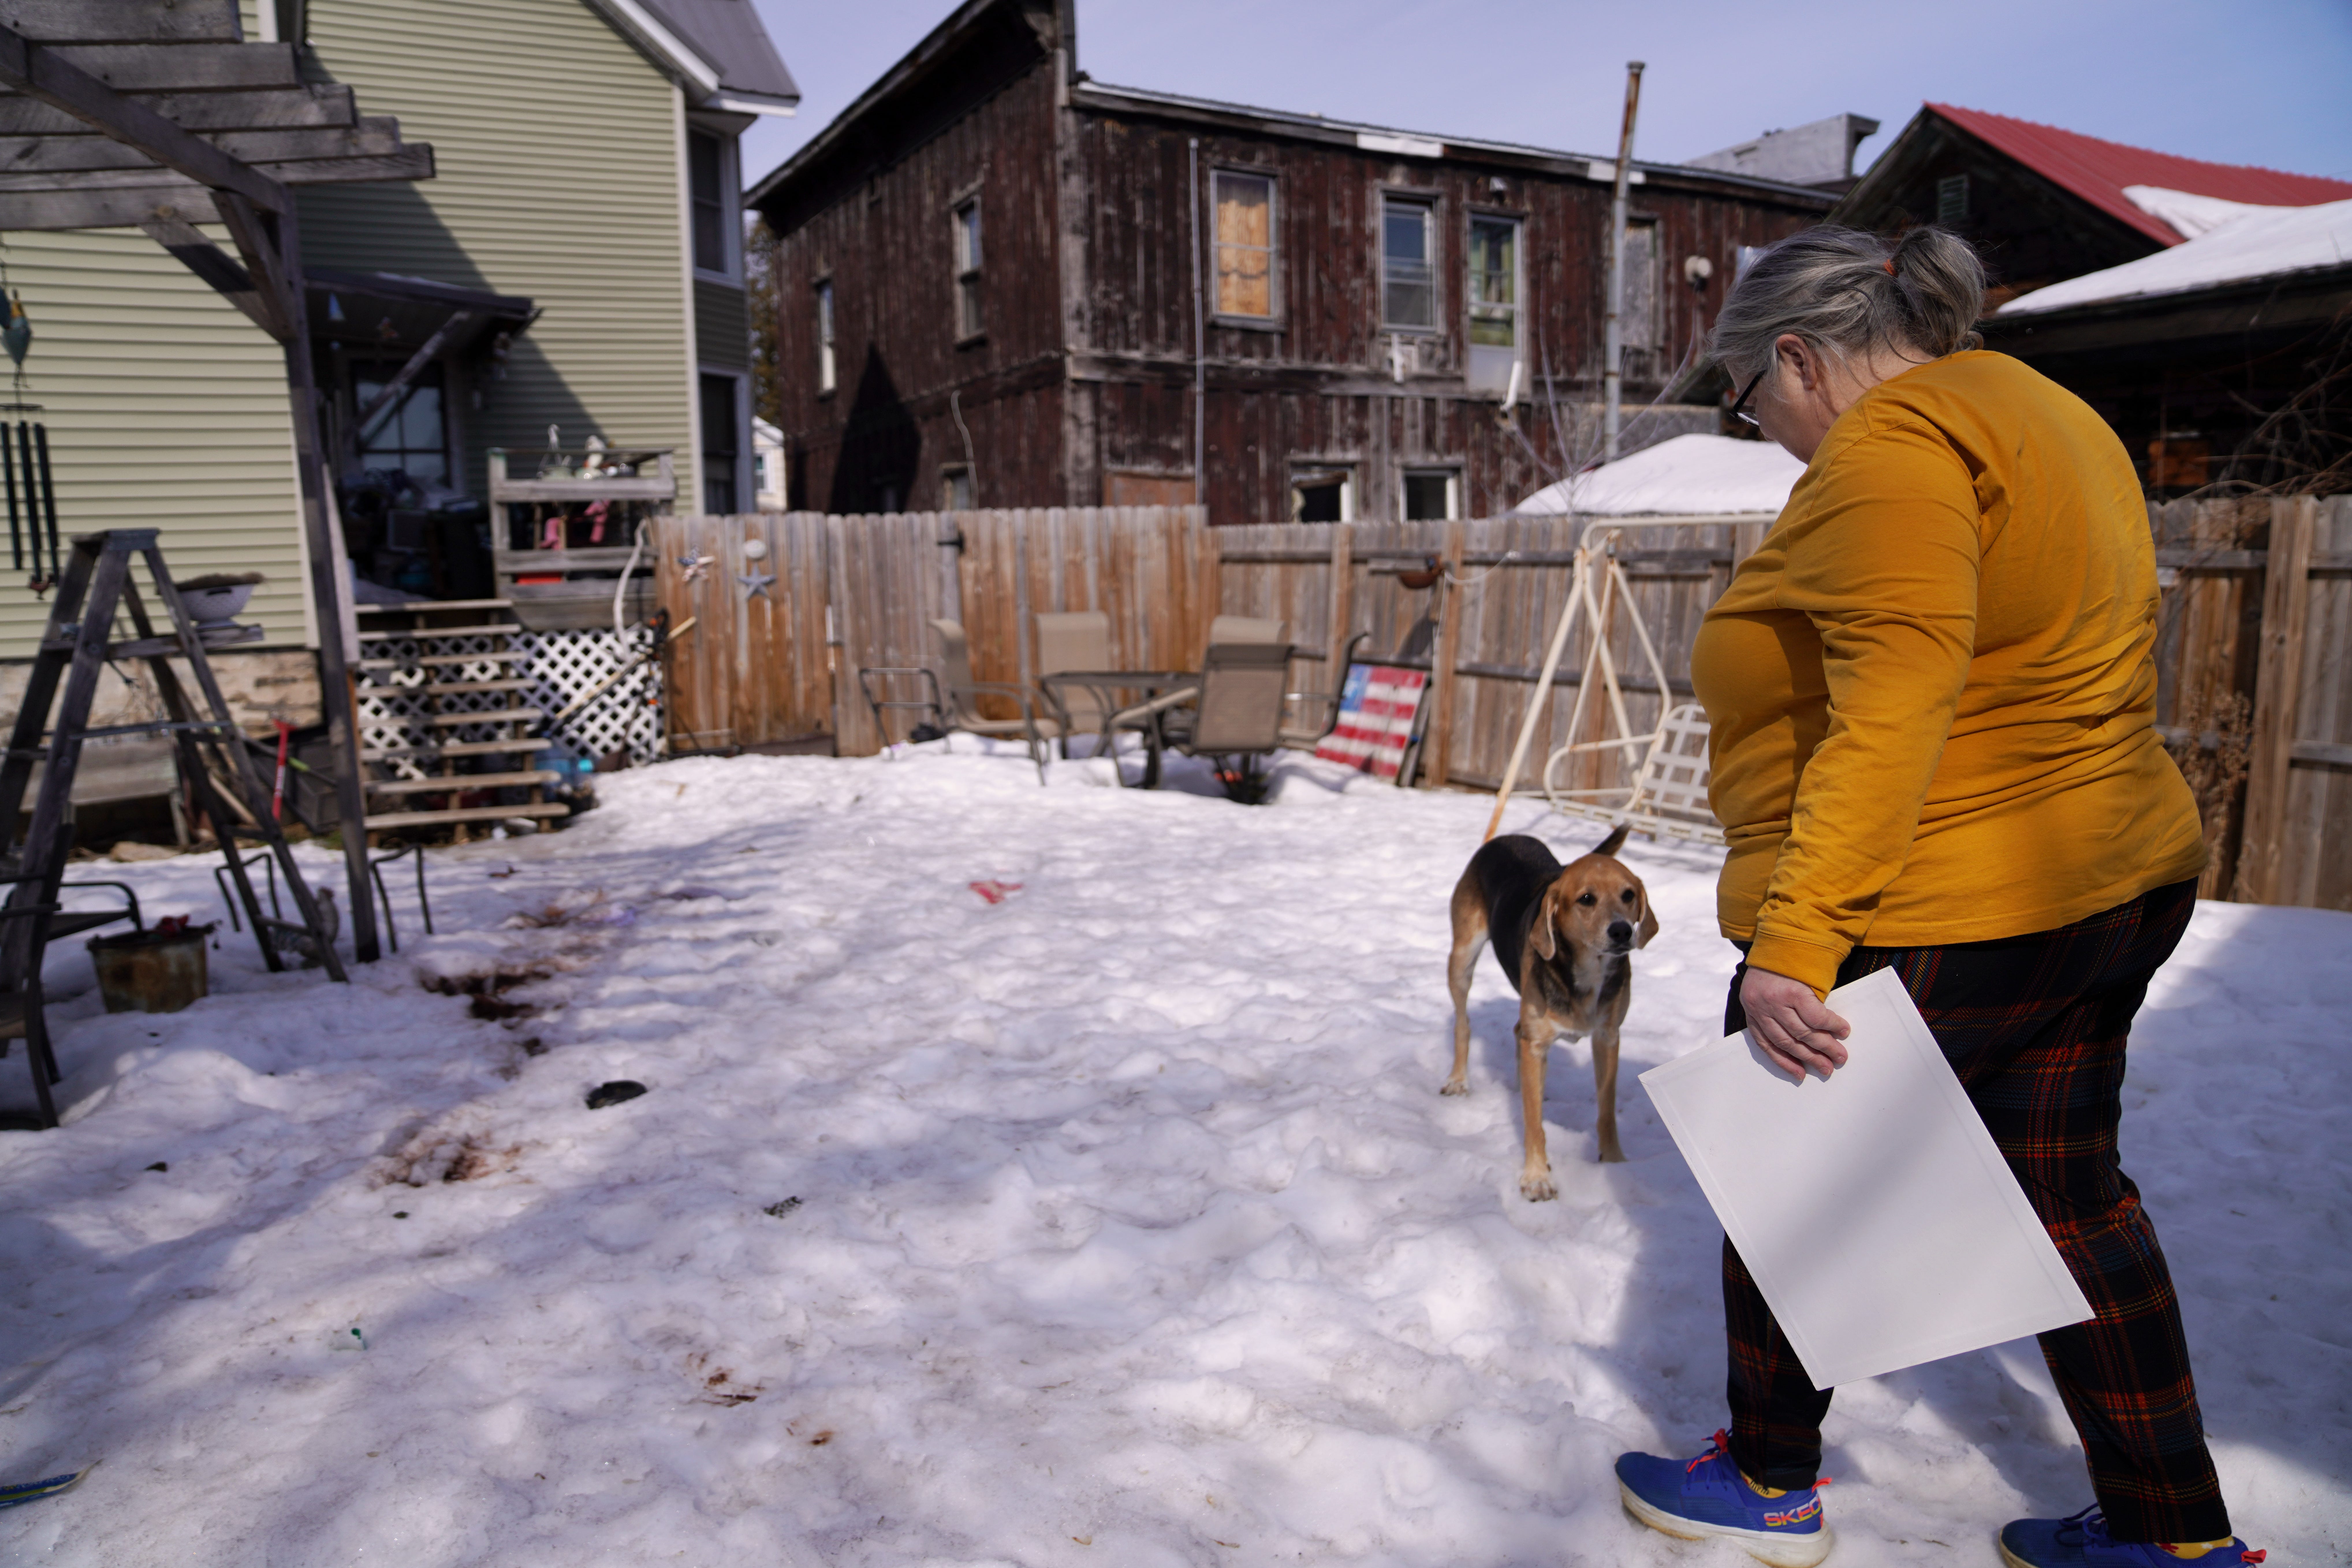 Carrie Demers tends to some chores in the yard of her home in Ogdensburg.